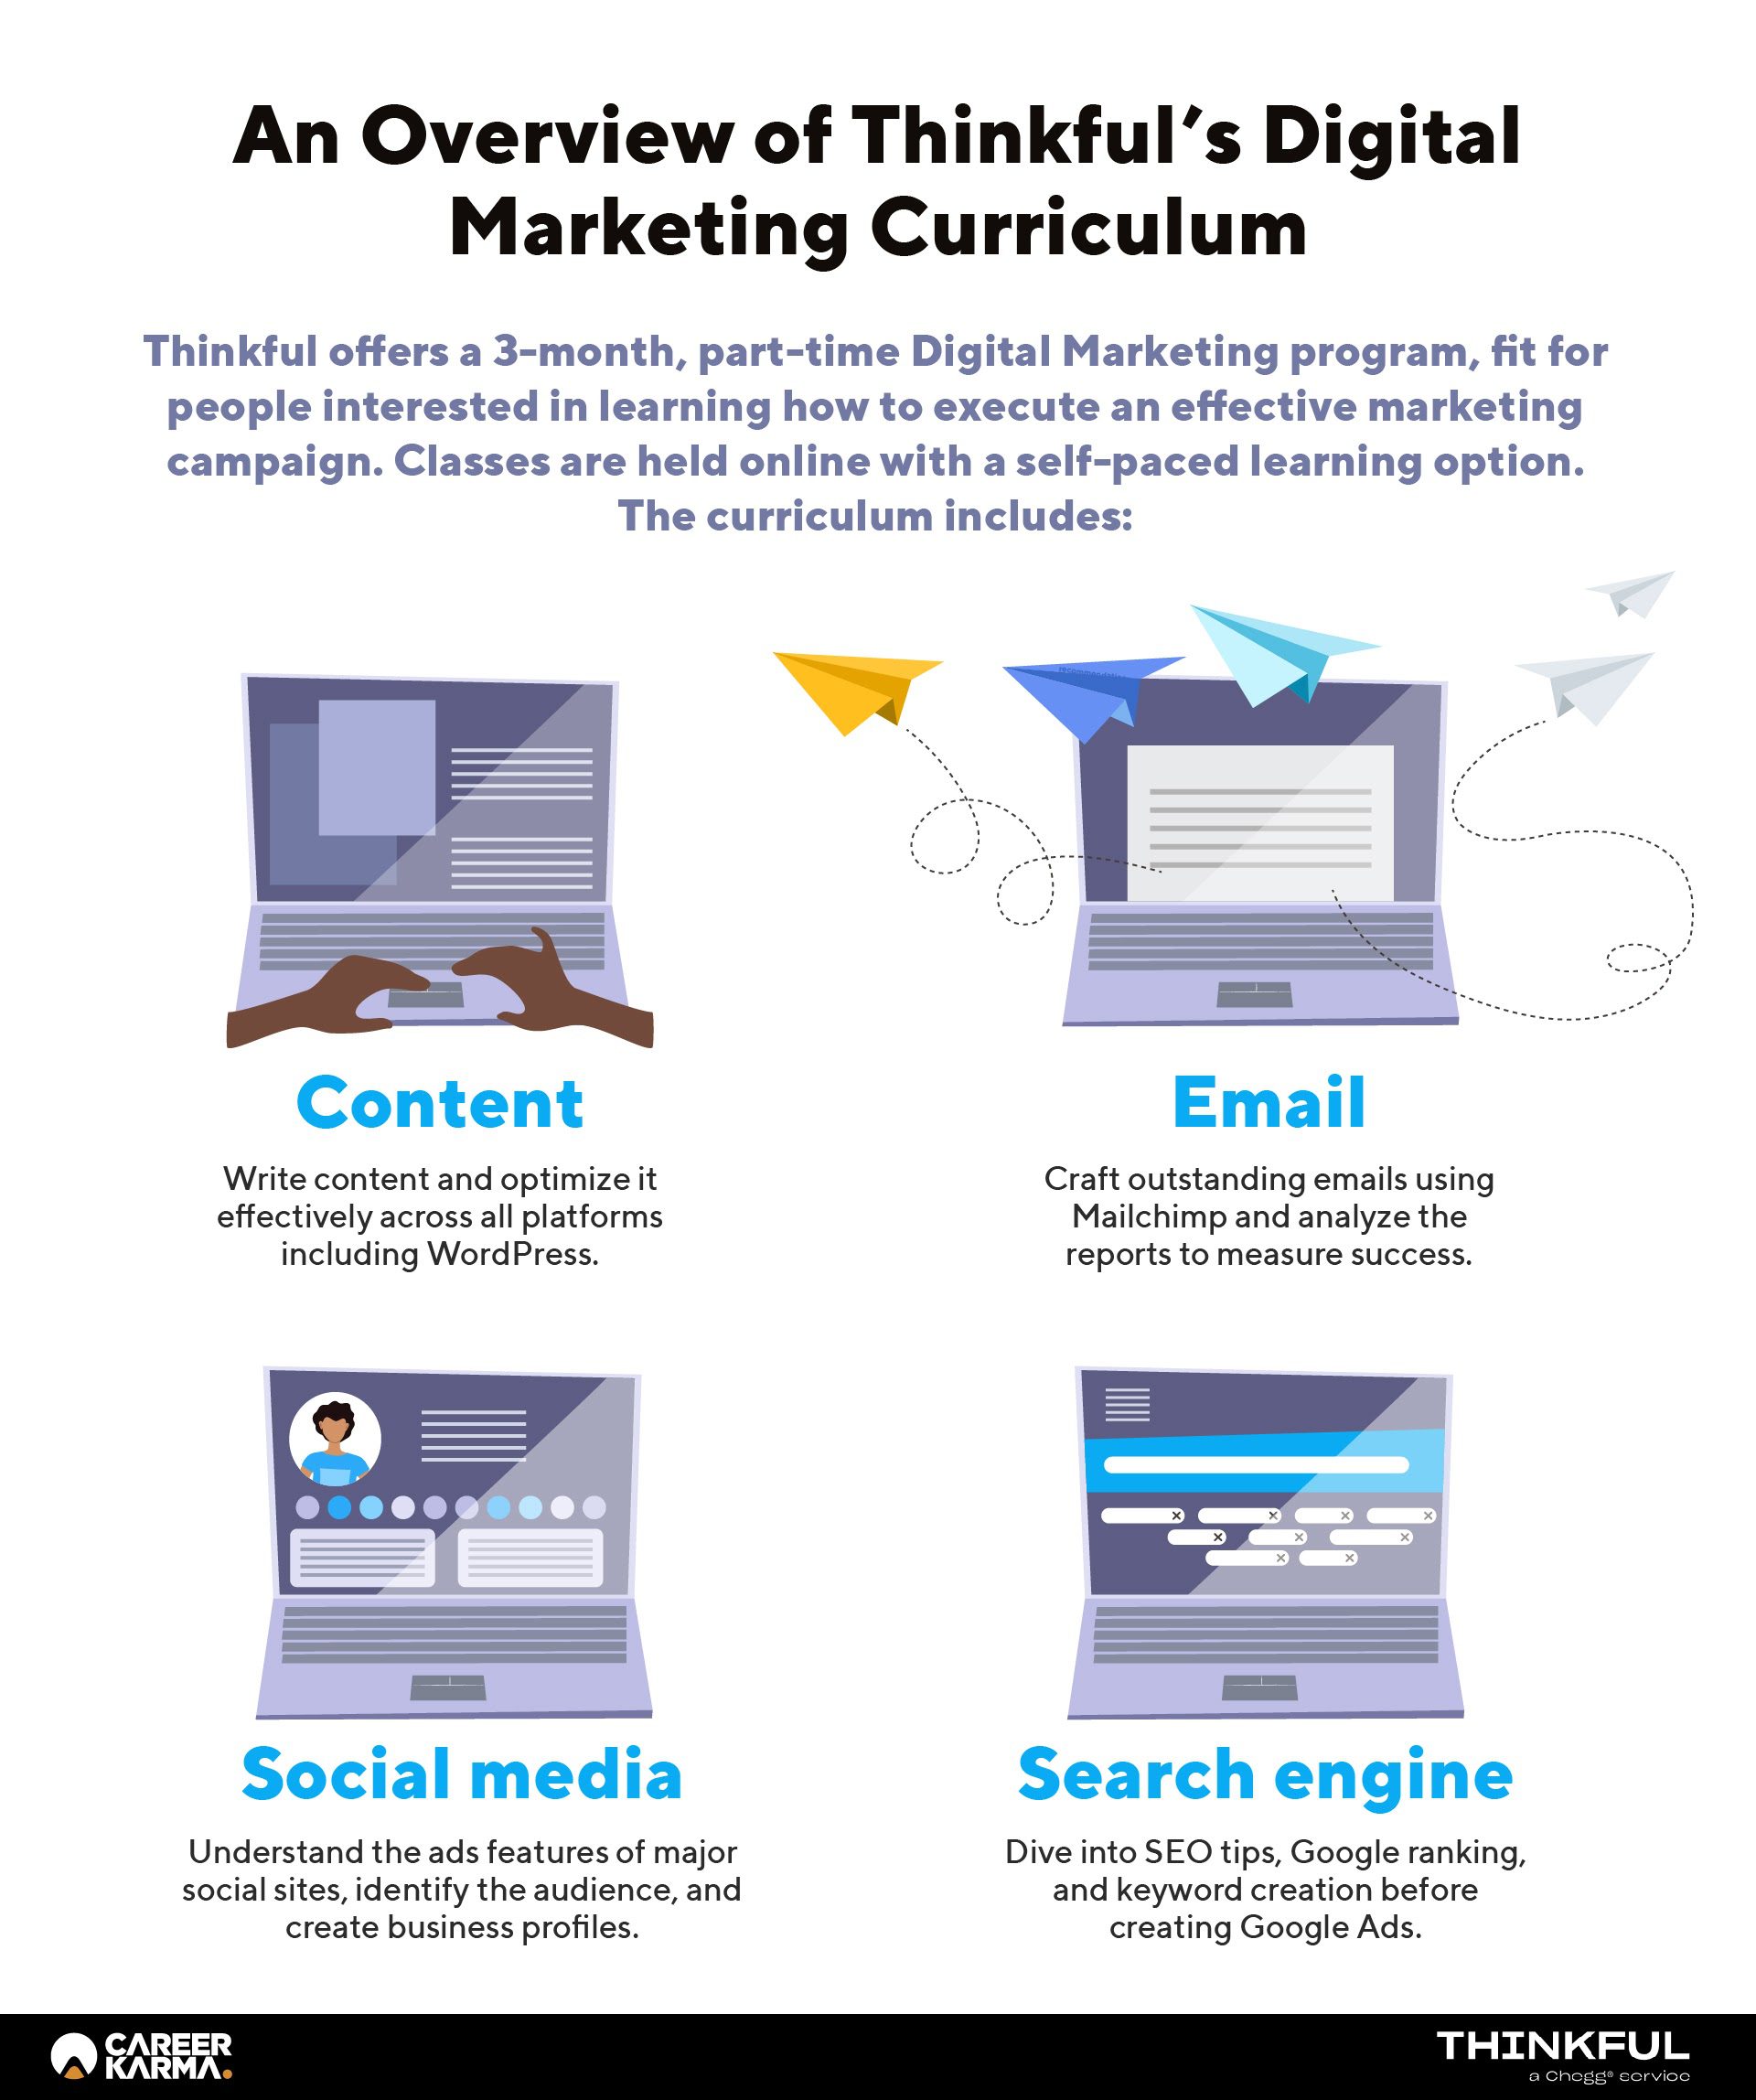 An infographic covering the primary topics discussed in Thinkful’s Digital Marketing curriculum